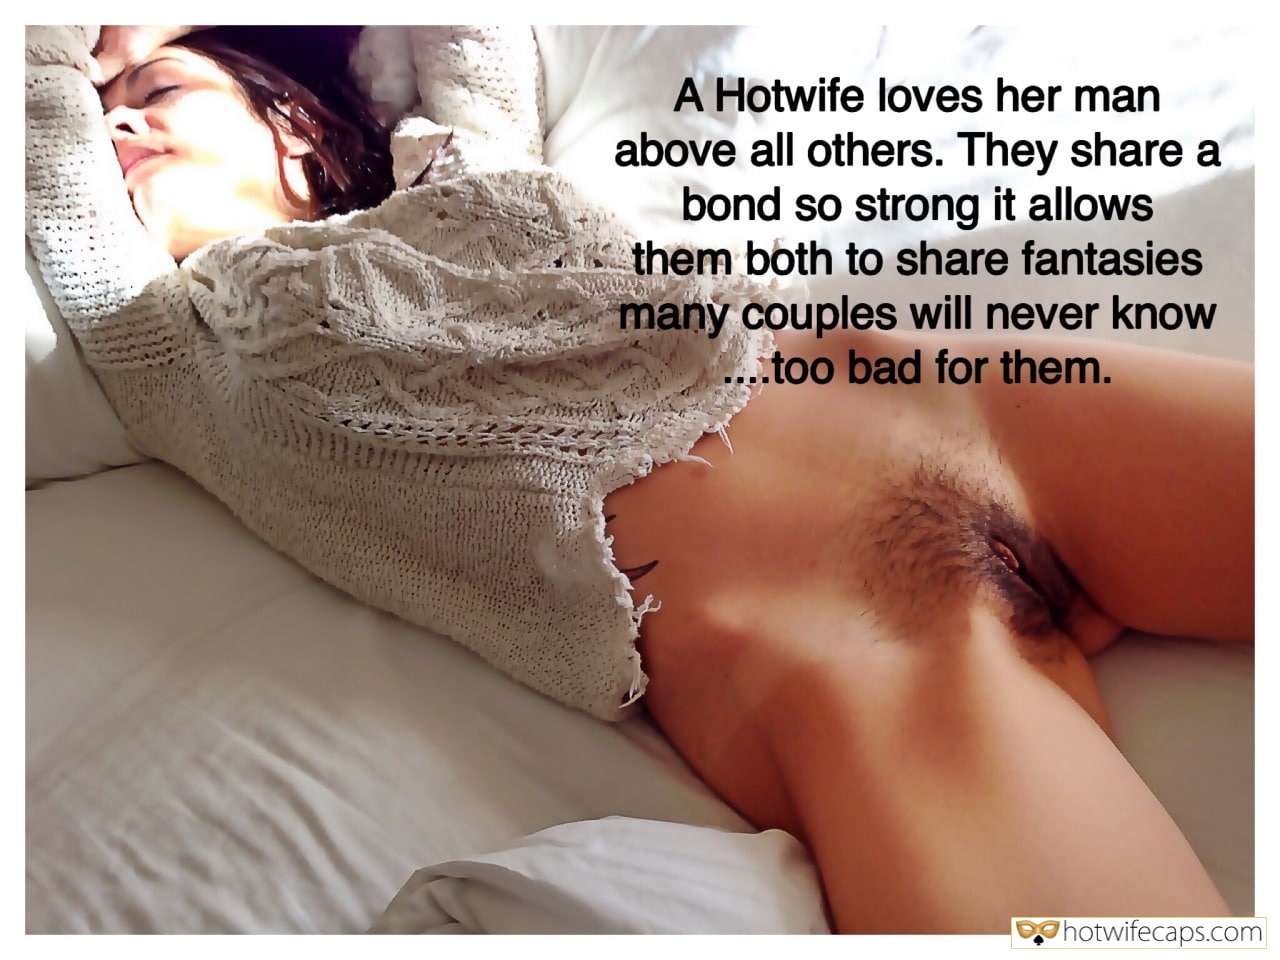 My Favorite Hotwife Caption №559502 Her horny imaginations for hairy pussy